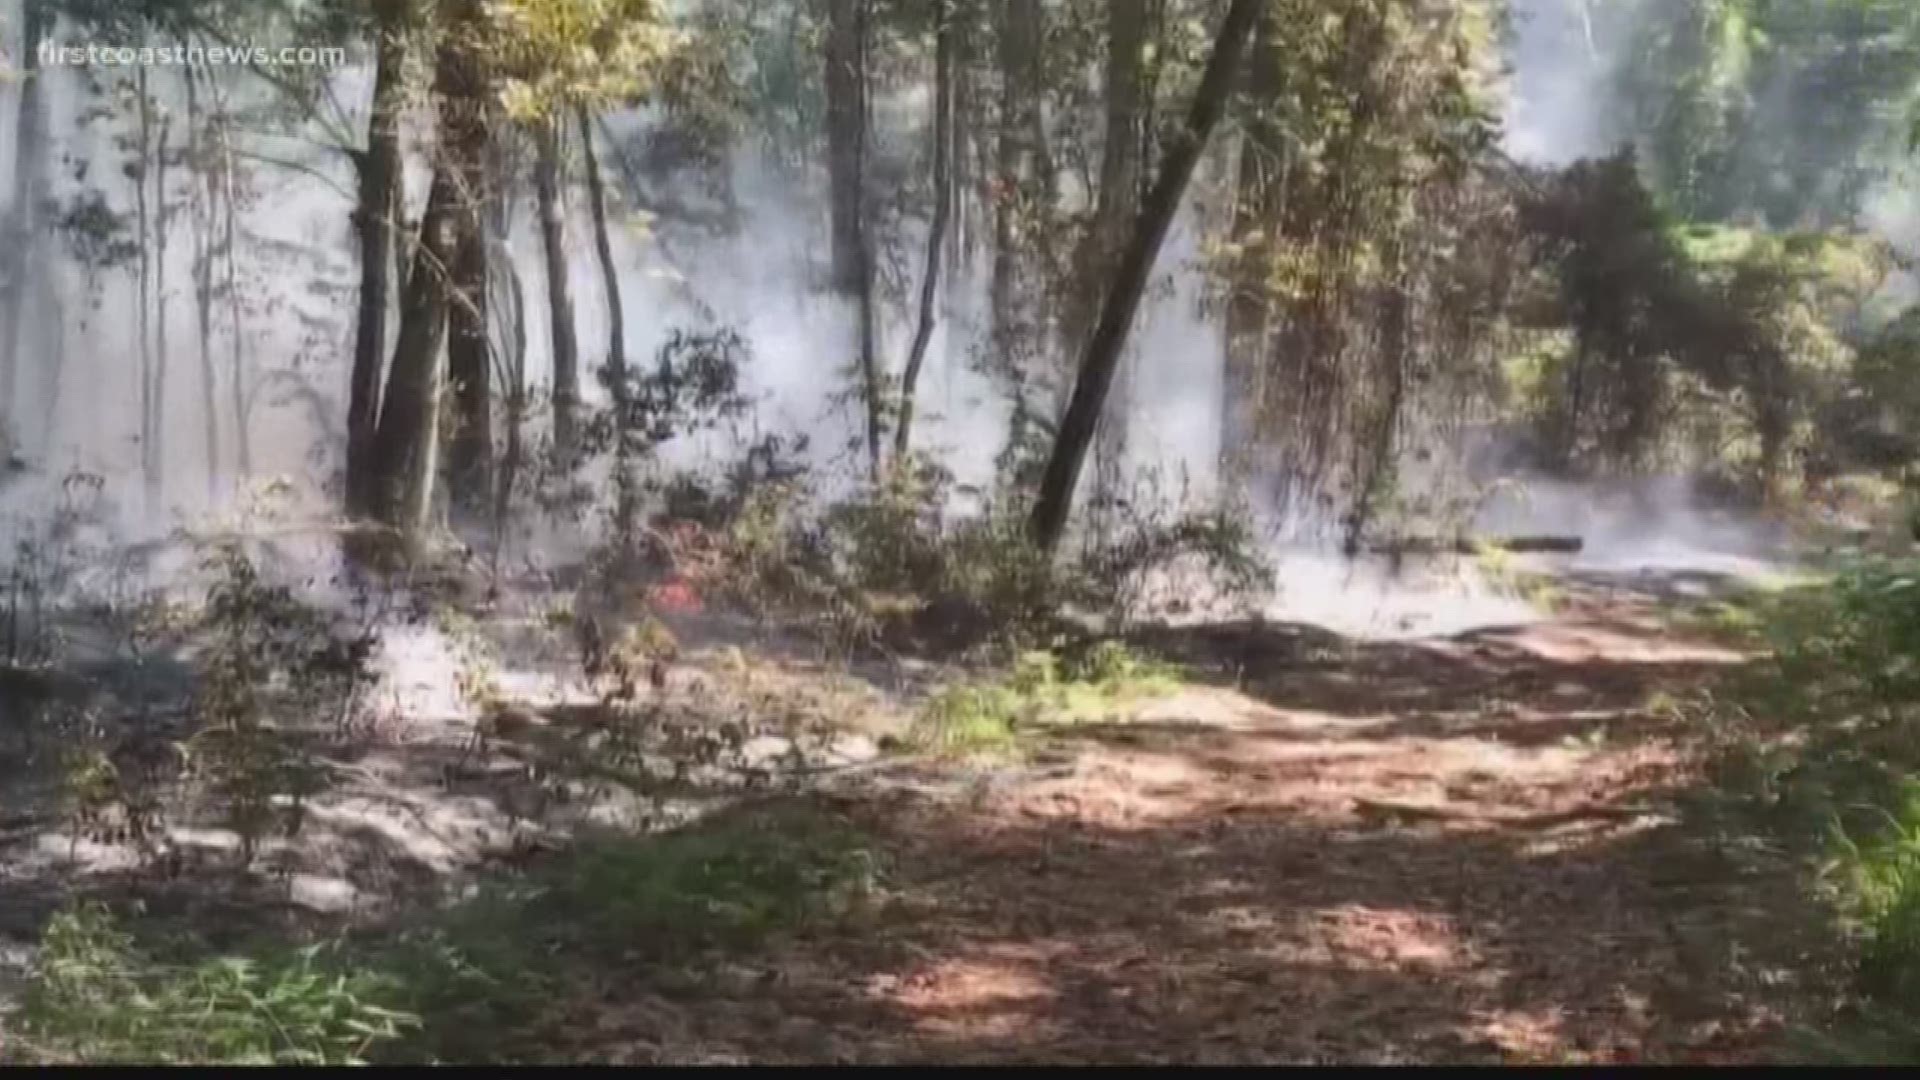 The Yellow Bluff Fire is only about 25 percent contained after it grew to 150 acres Wednesday night, according to the Florida Forest Service (FFS).